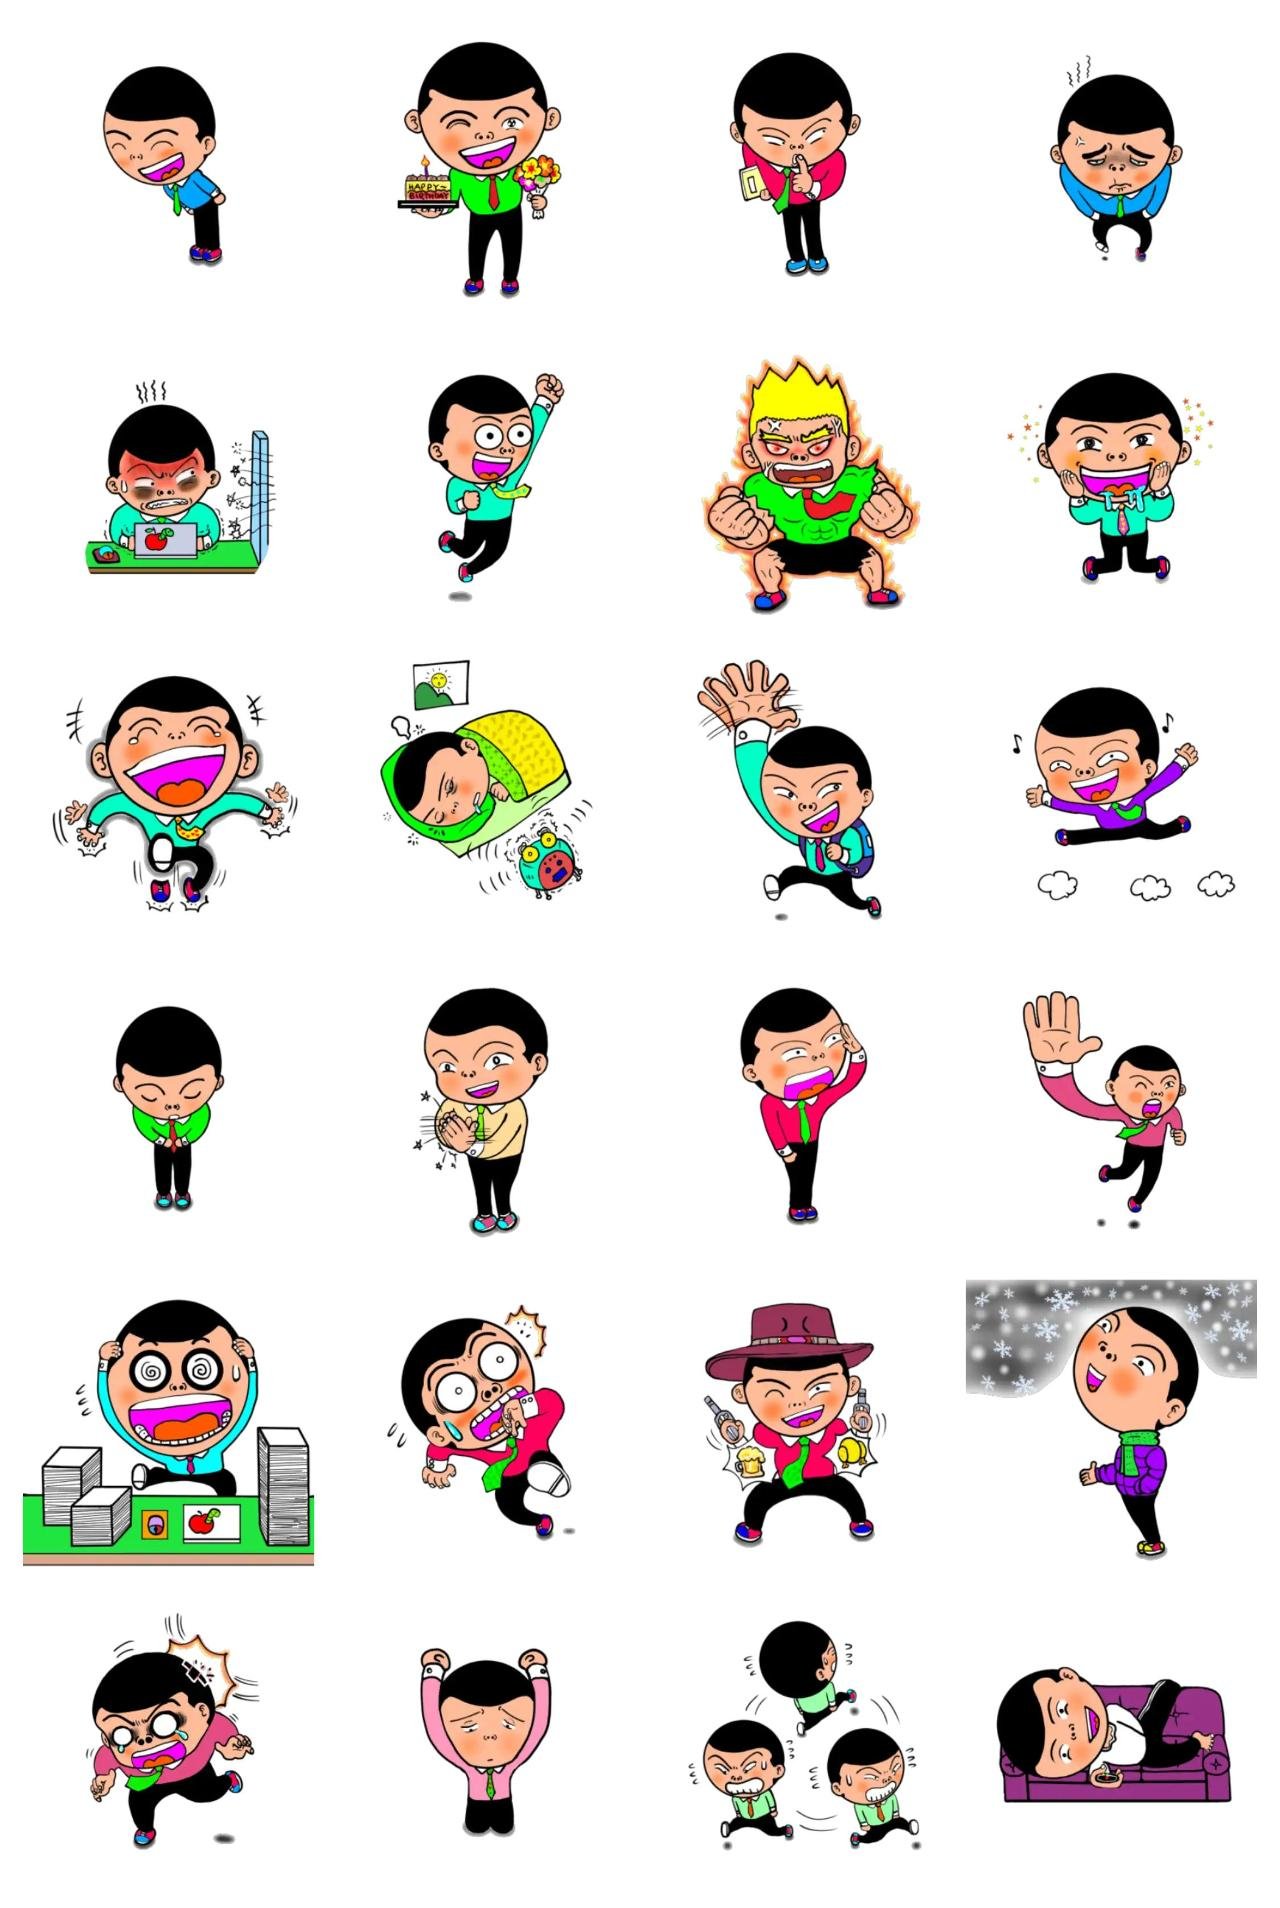 Mr. WorkerBee People sticker pack for Whatsapp, Telegram, Signal, and others chatting and message apps